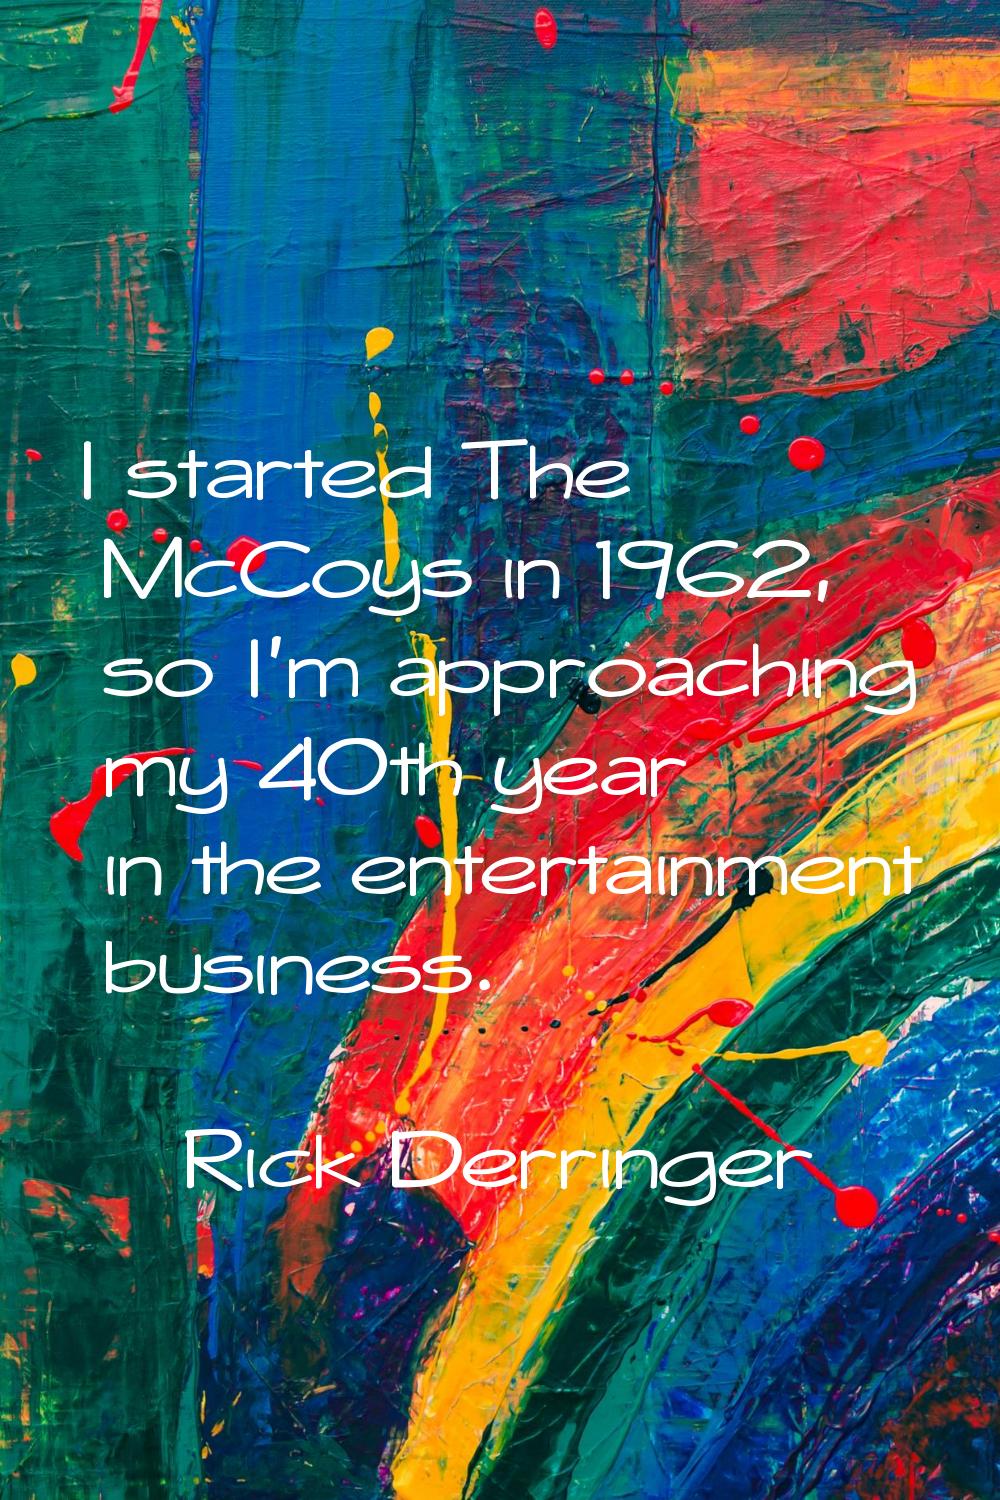 I started The McCoys in 1962, so I'm approaching my 40th year in the entertainment business.